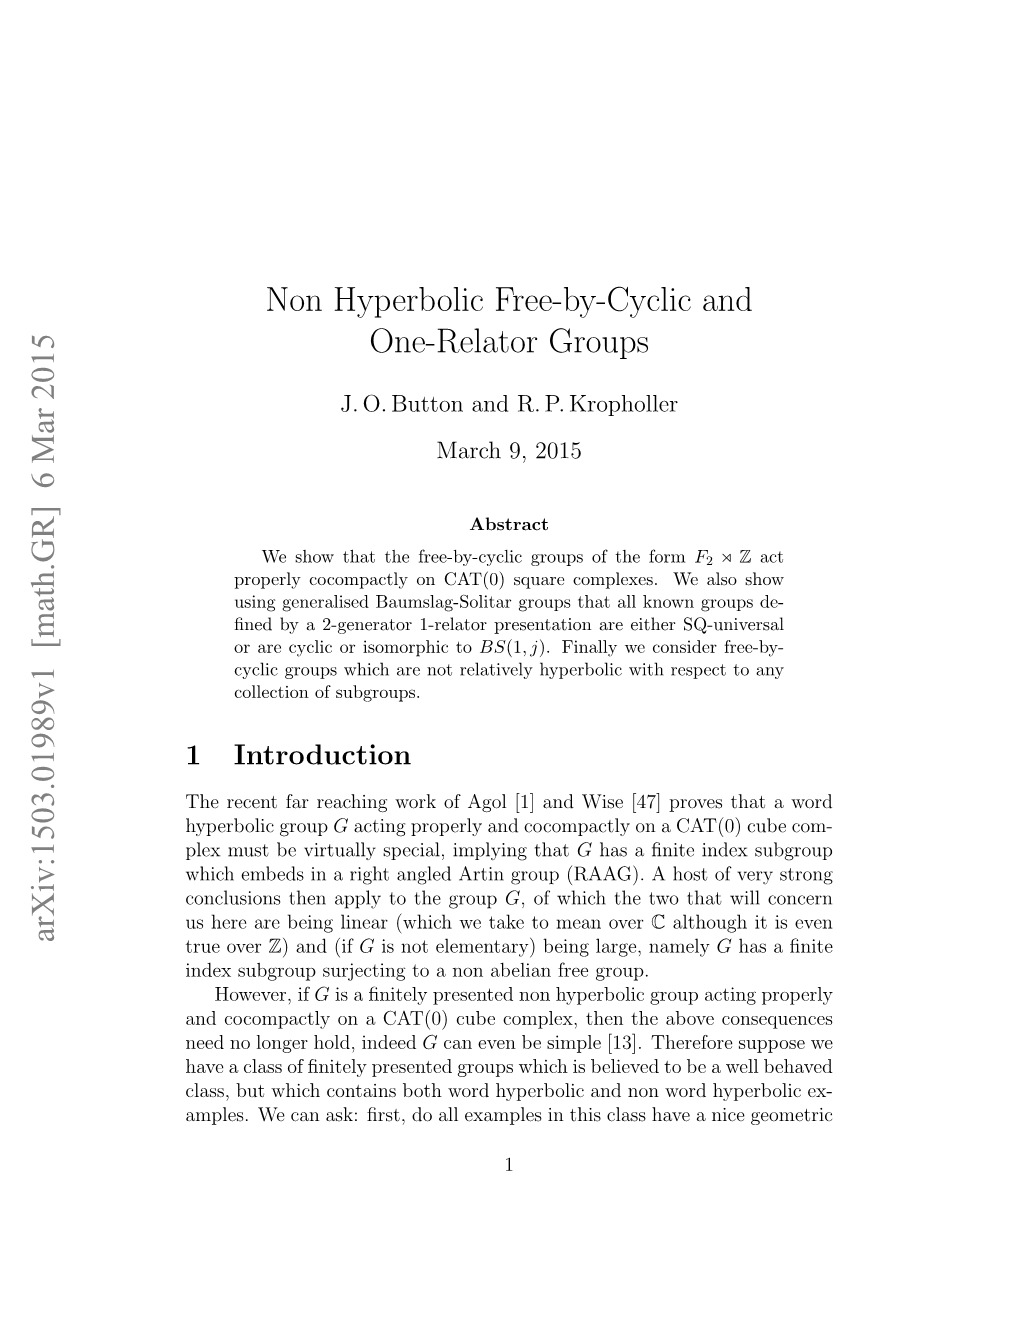 Non Hyperbolic Free-By-Cyclic and One-Relator Groups Arxiv:1503.01989V1 [Math.GR] 6 Mar 2015